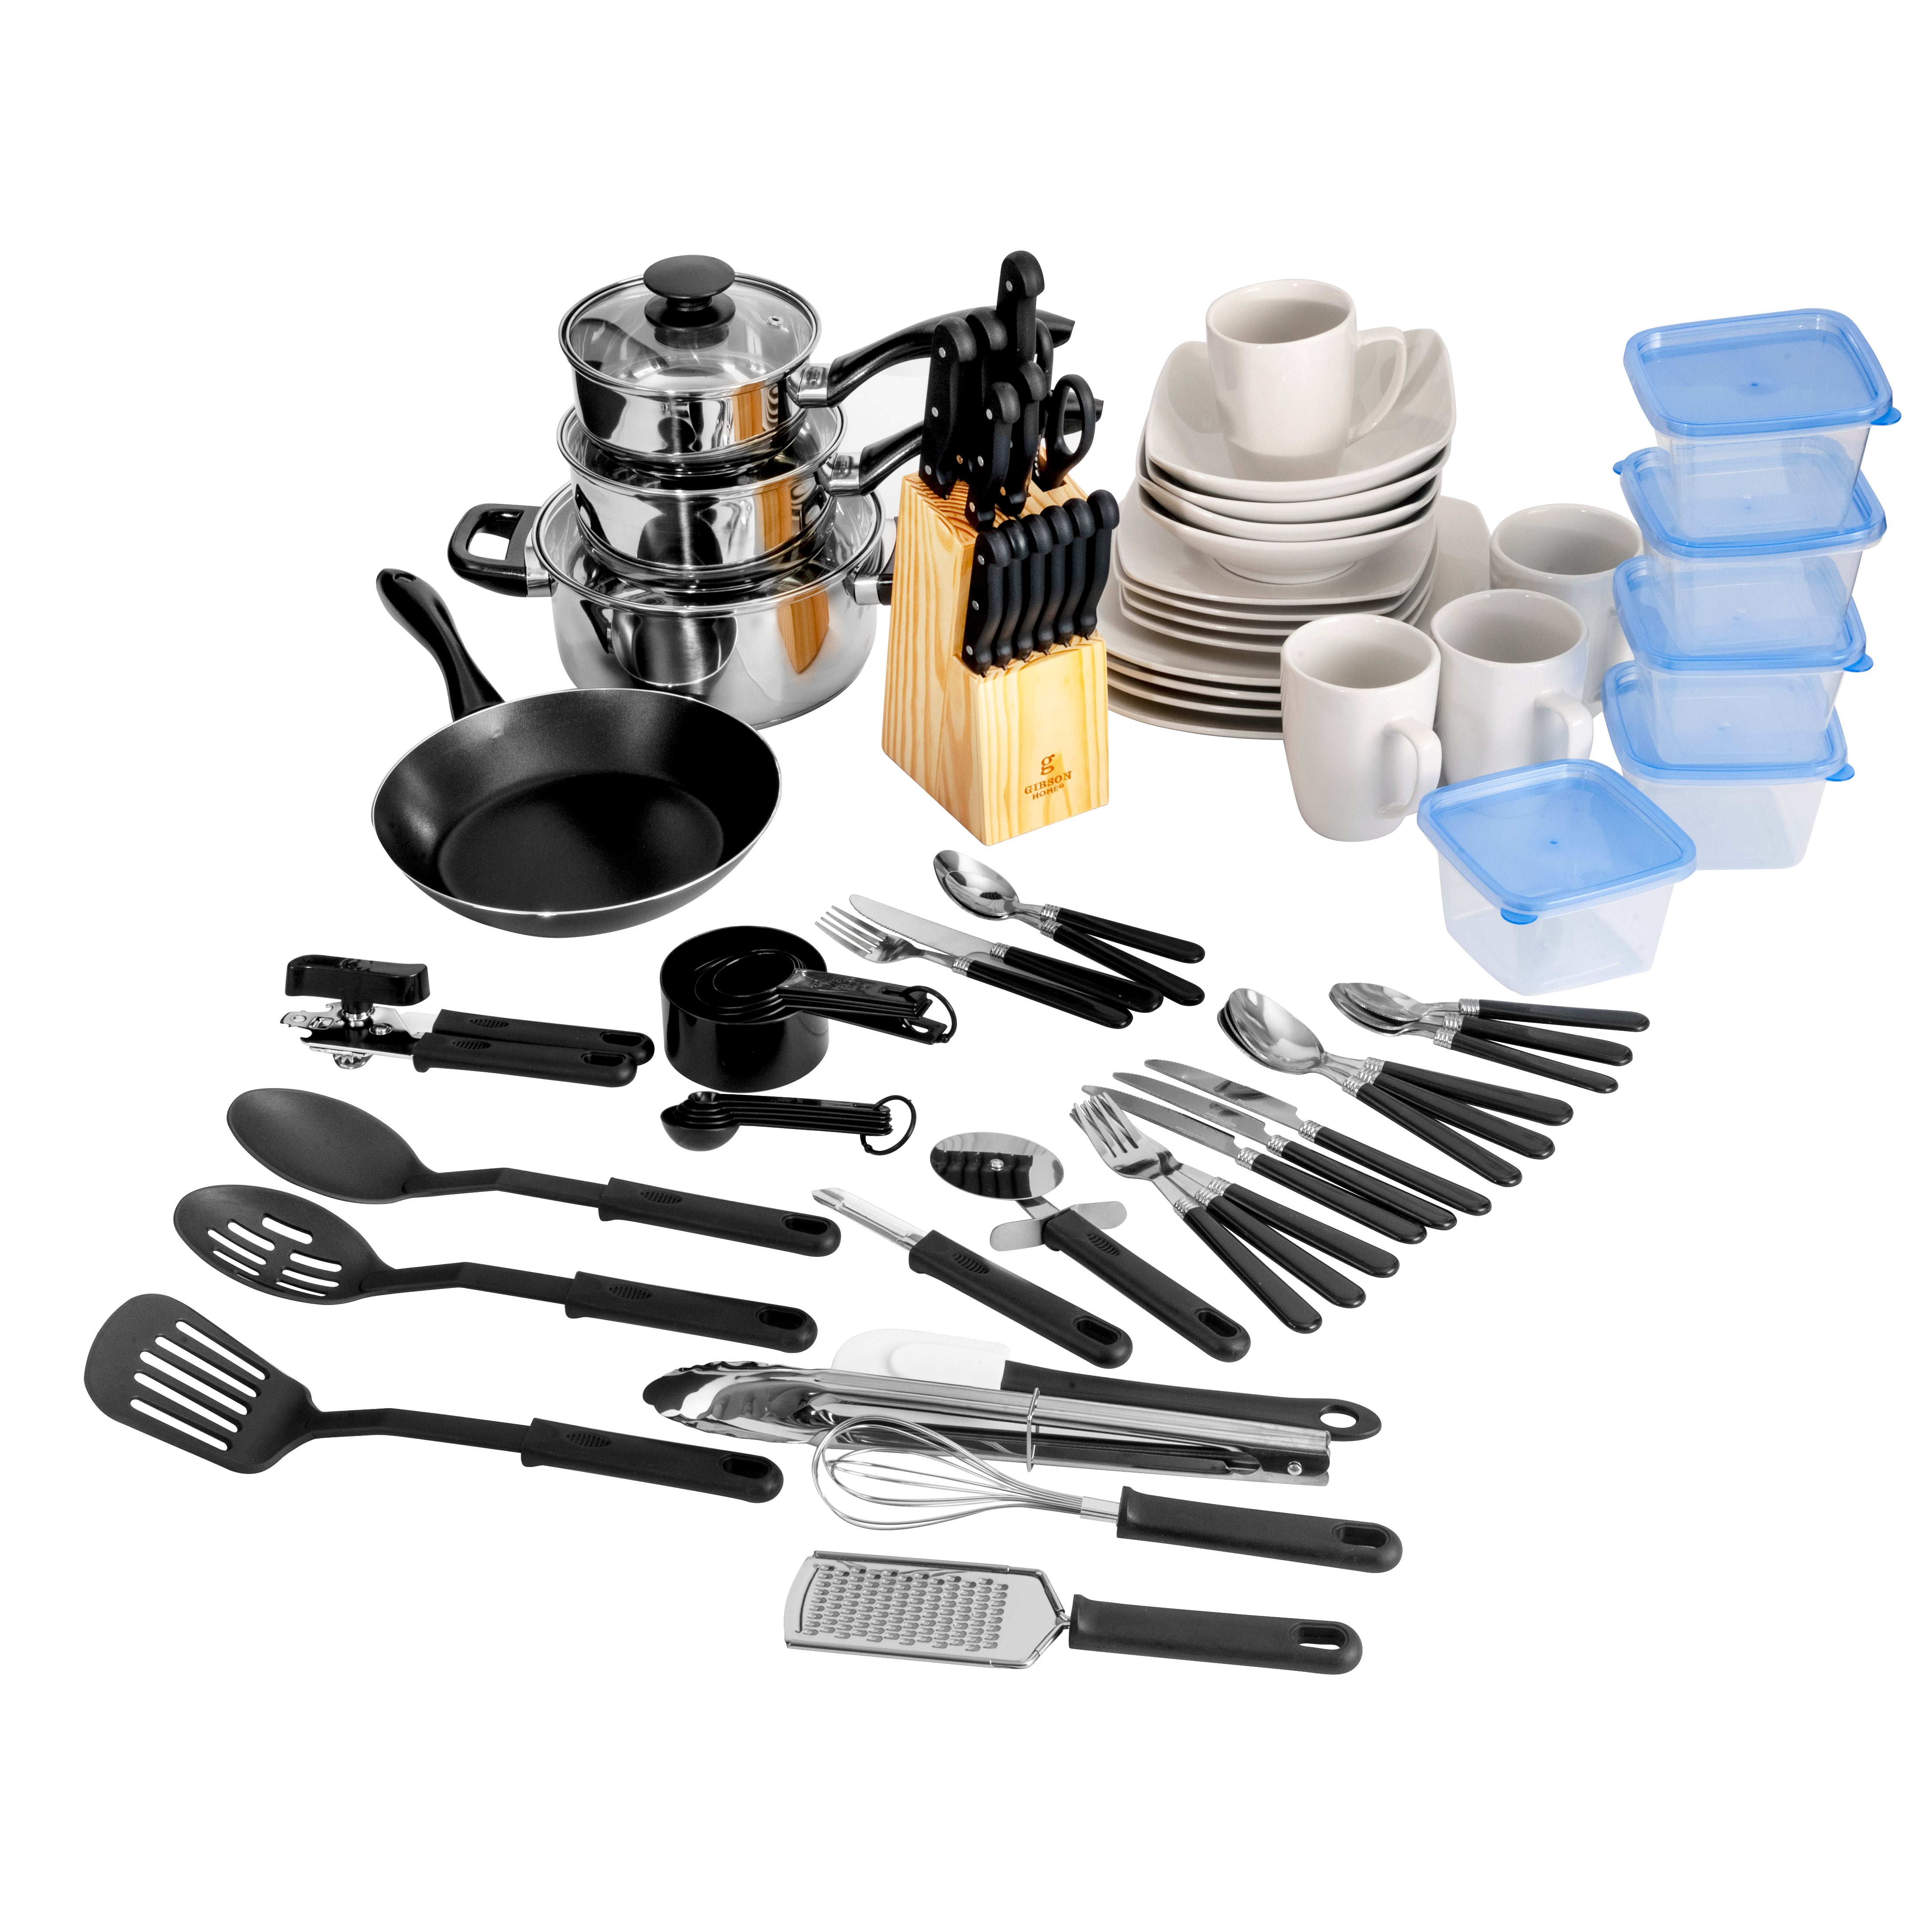 Home Kitchen In A Box 83-Piece Combo Set, Black 793889252430